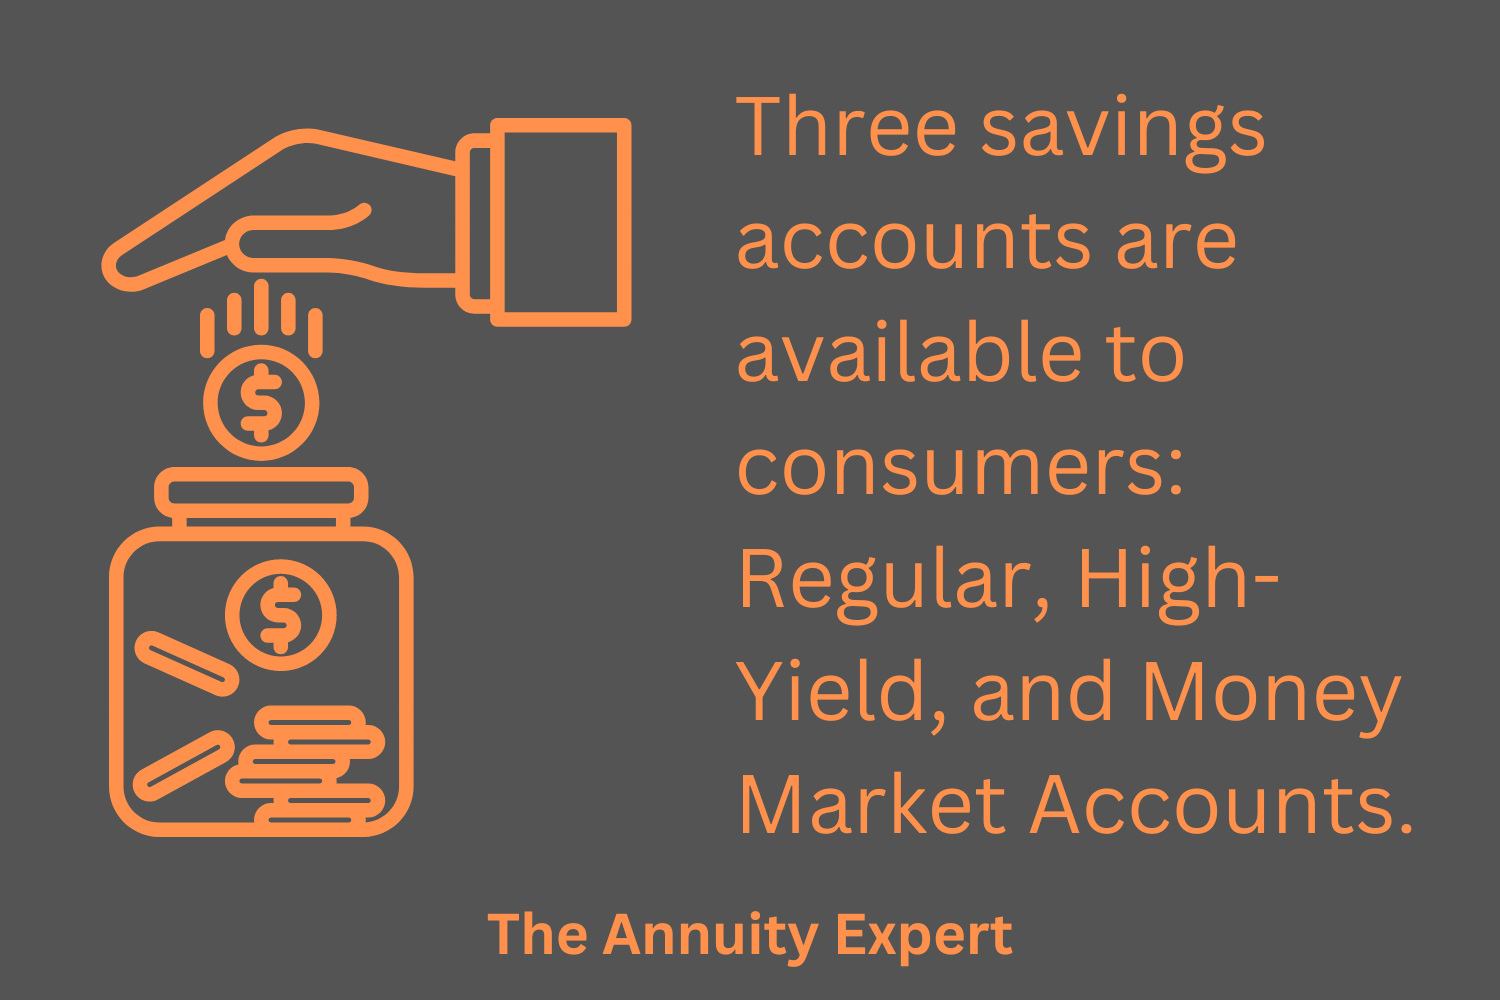 What Are Three Types Of Savings Accounts?